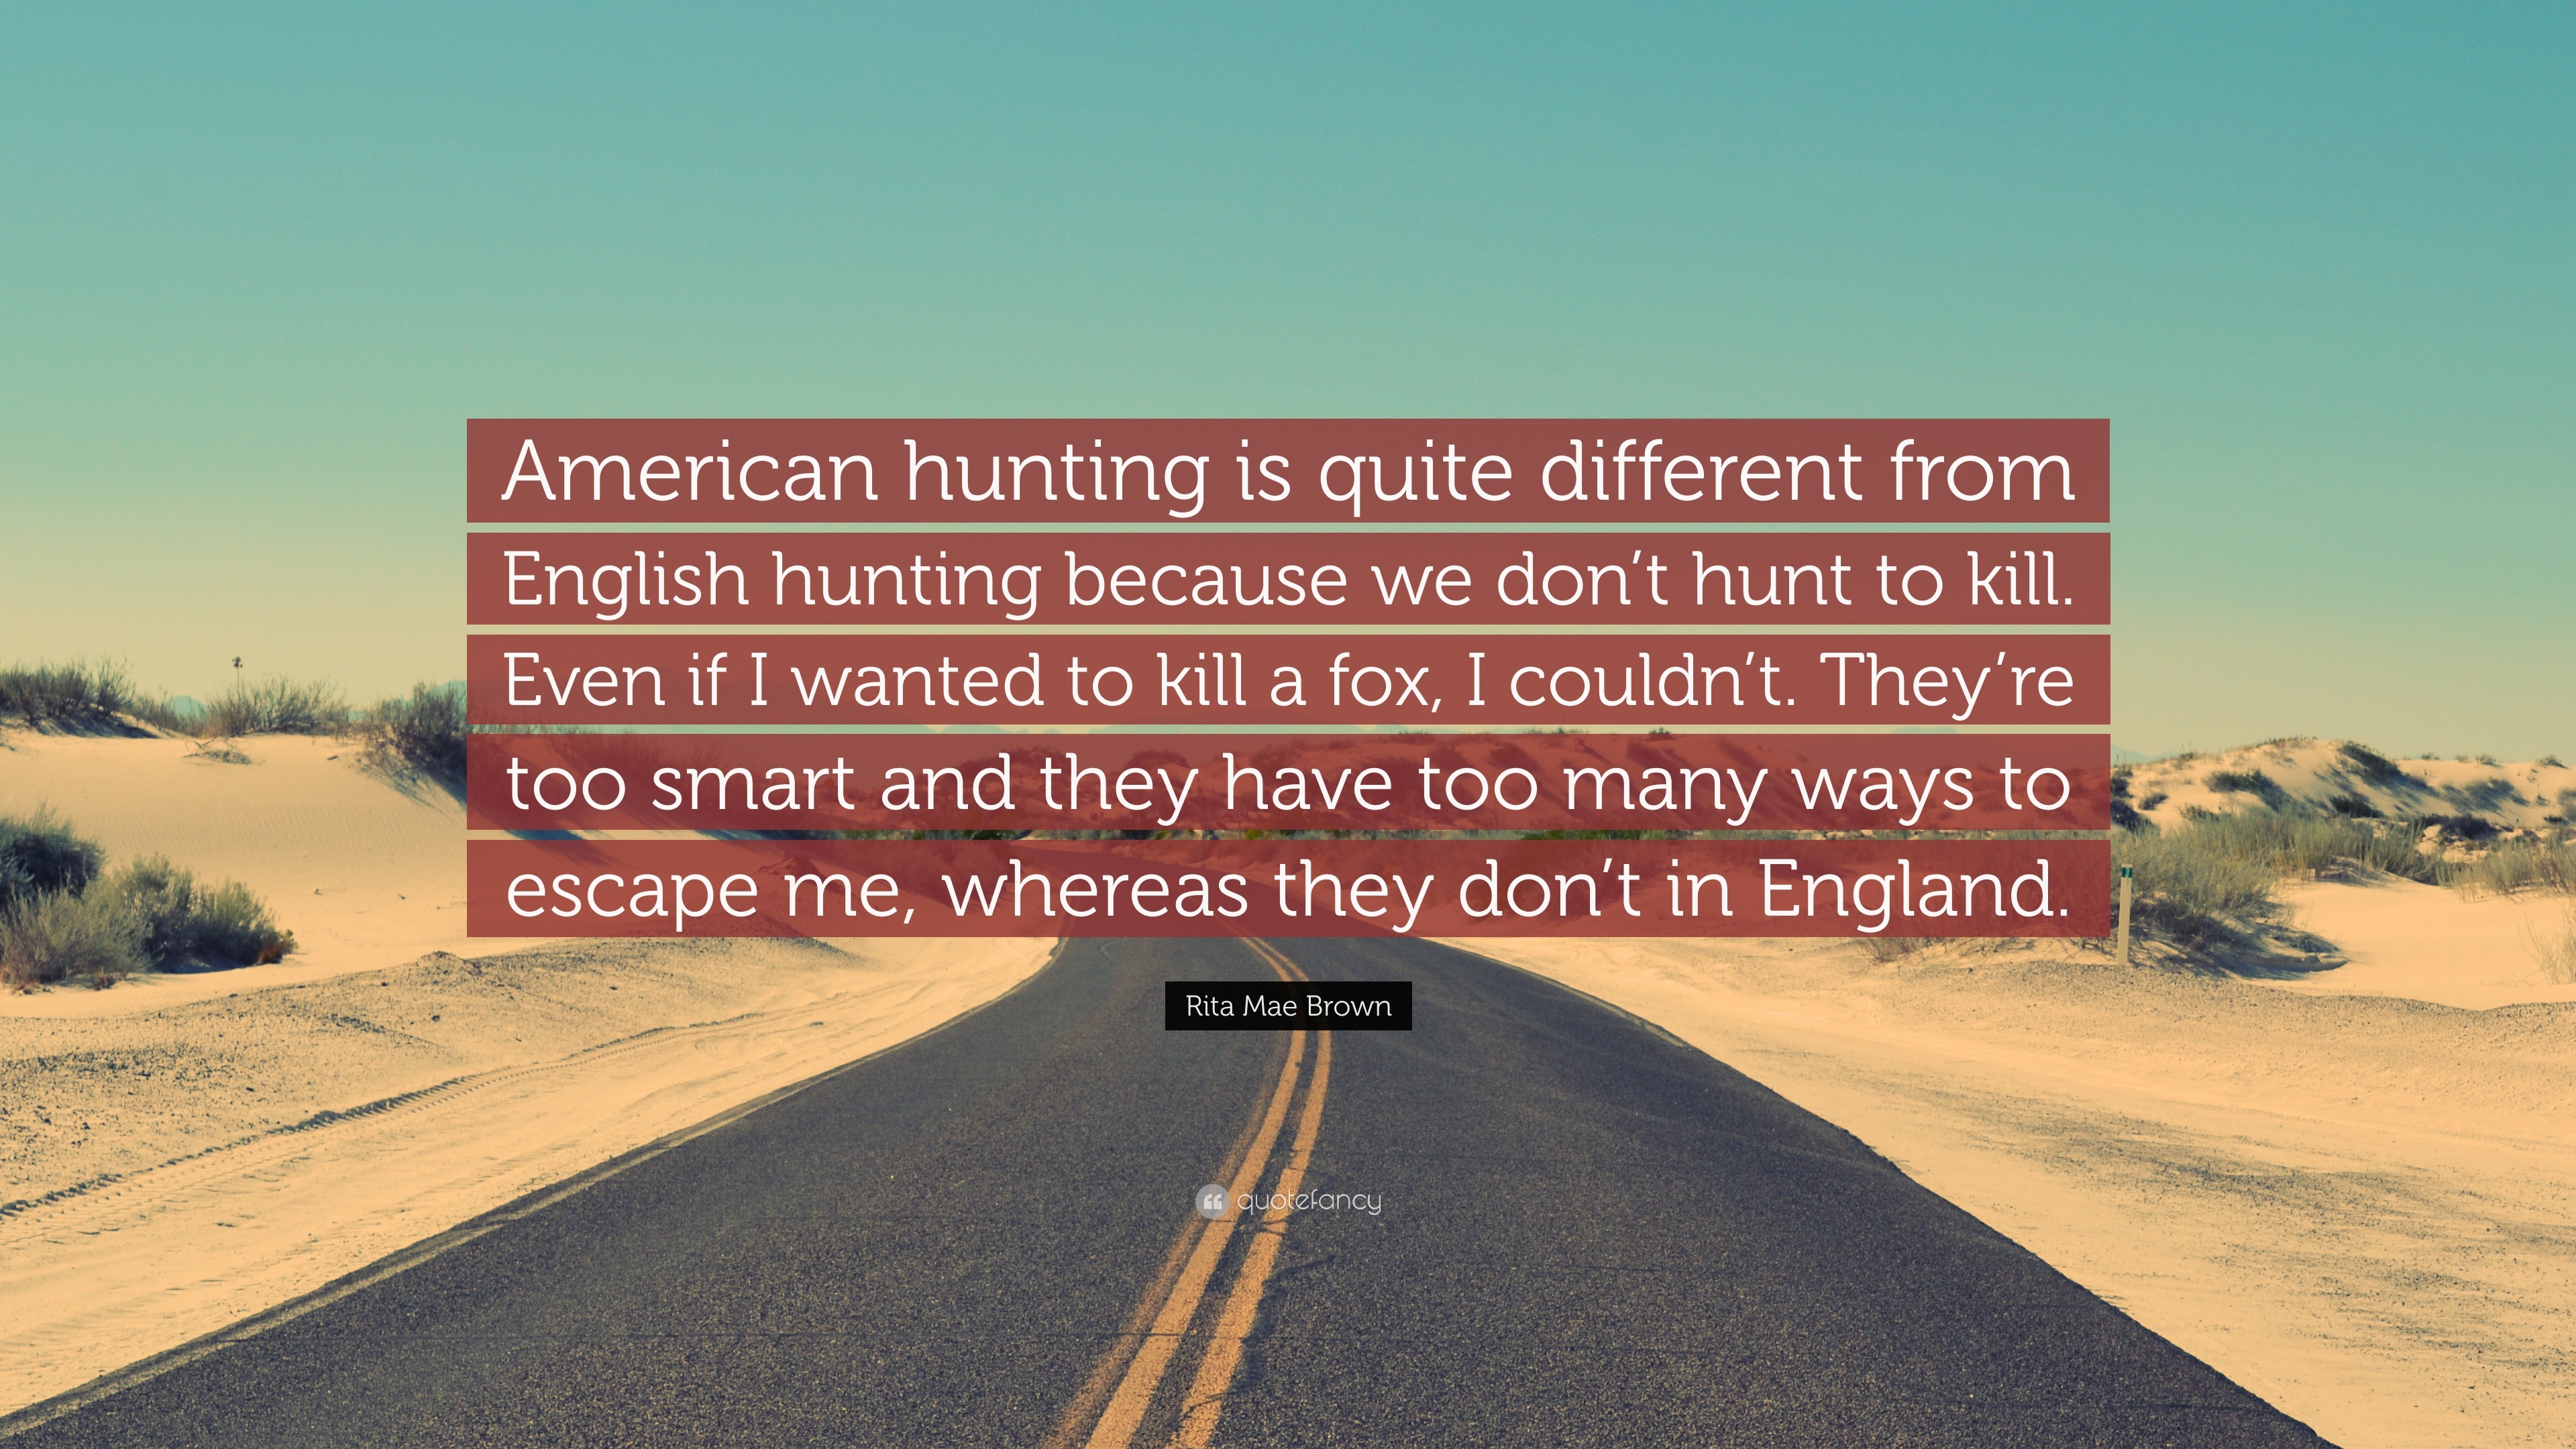 https://quotefancy.com/media/wallpaper/3840x2160/350292-Rita-Mae-Brown-Quote-American-hunting-is-quite-different-from.jpg